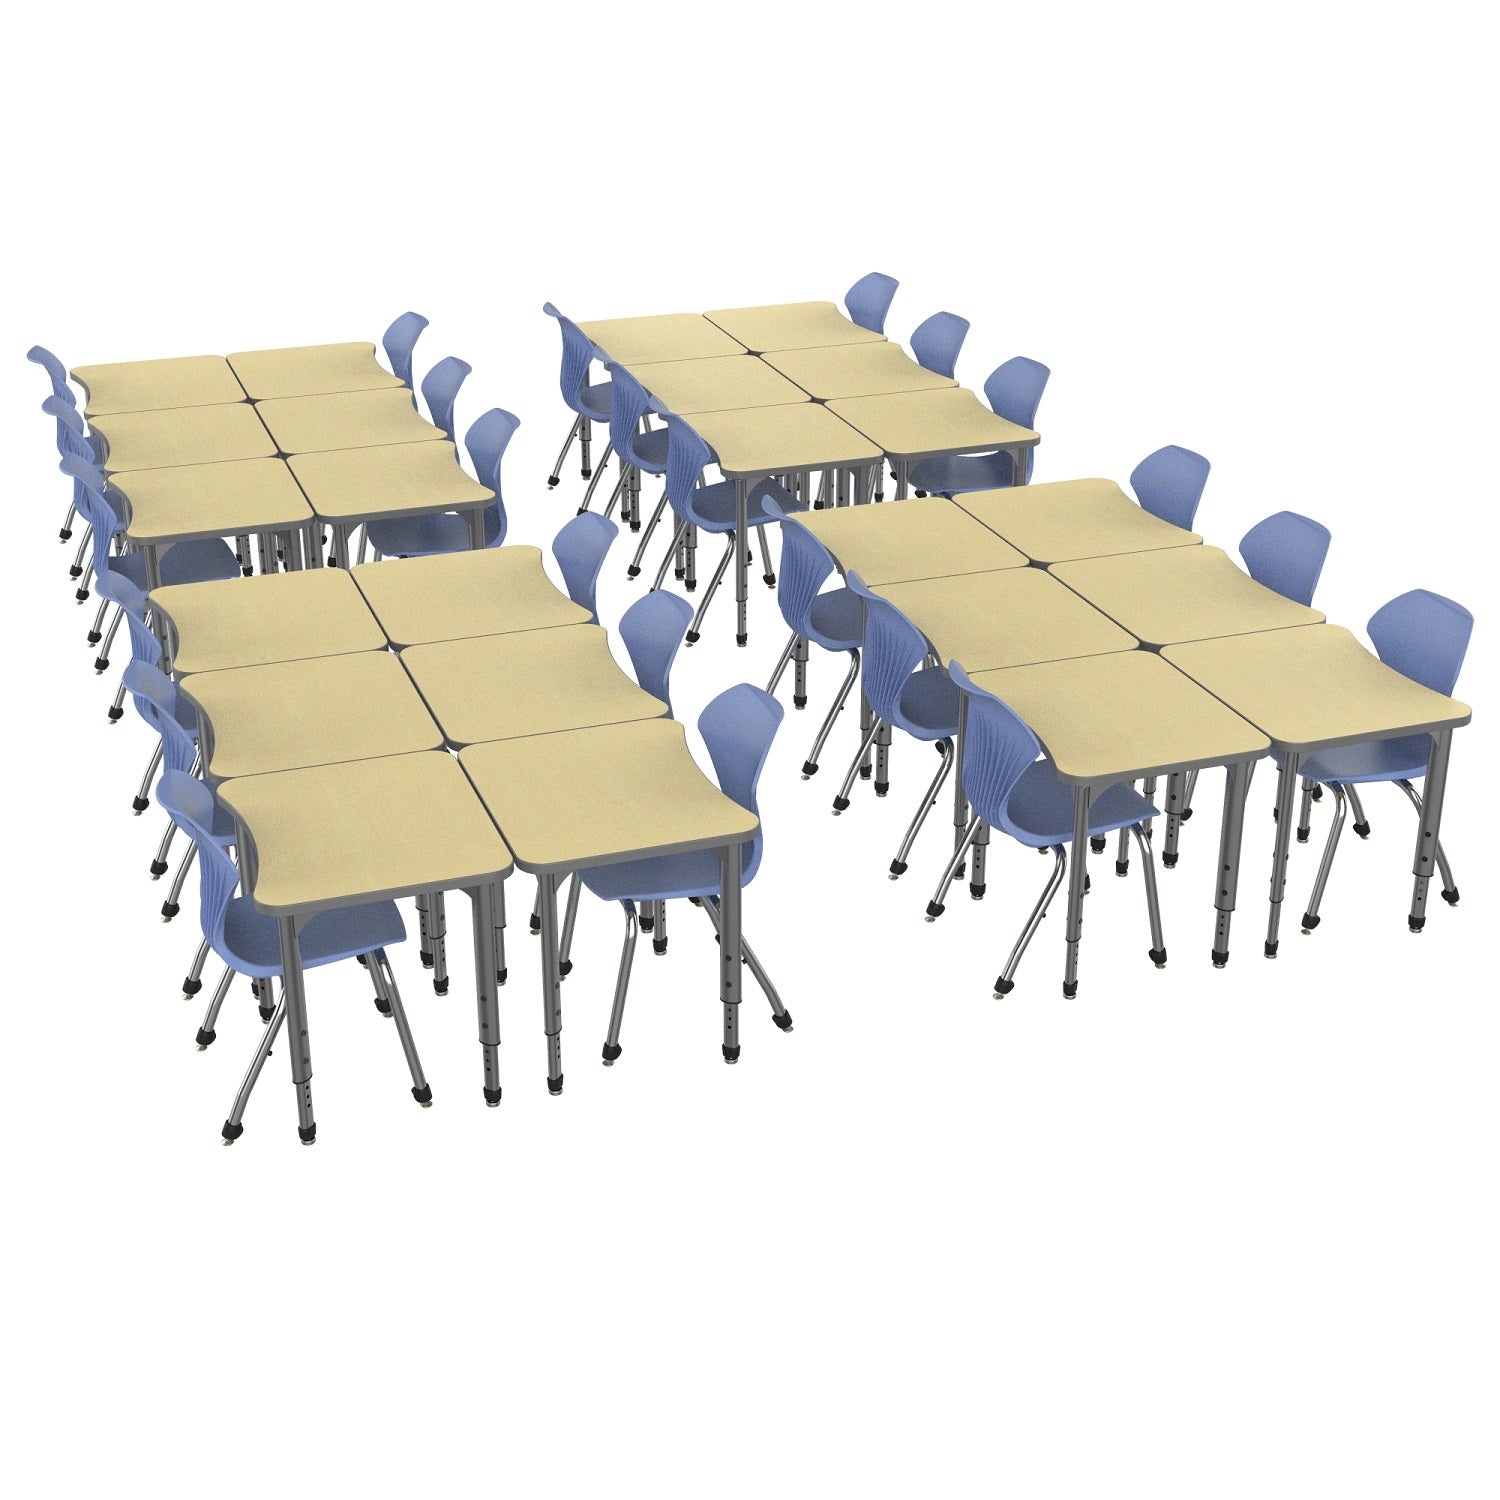 Apex Classroom Desk and Chair Package, 24 Curved Collaborative Student Desks with 24 Apex Stack Chairs